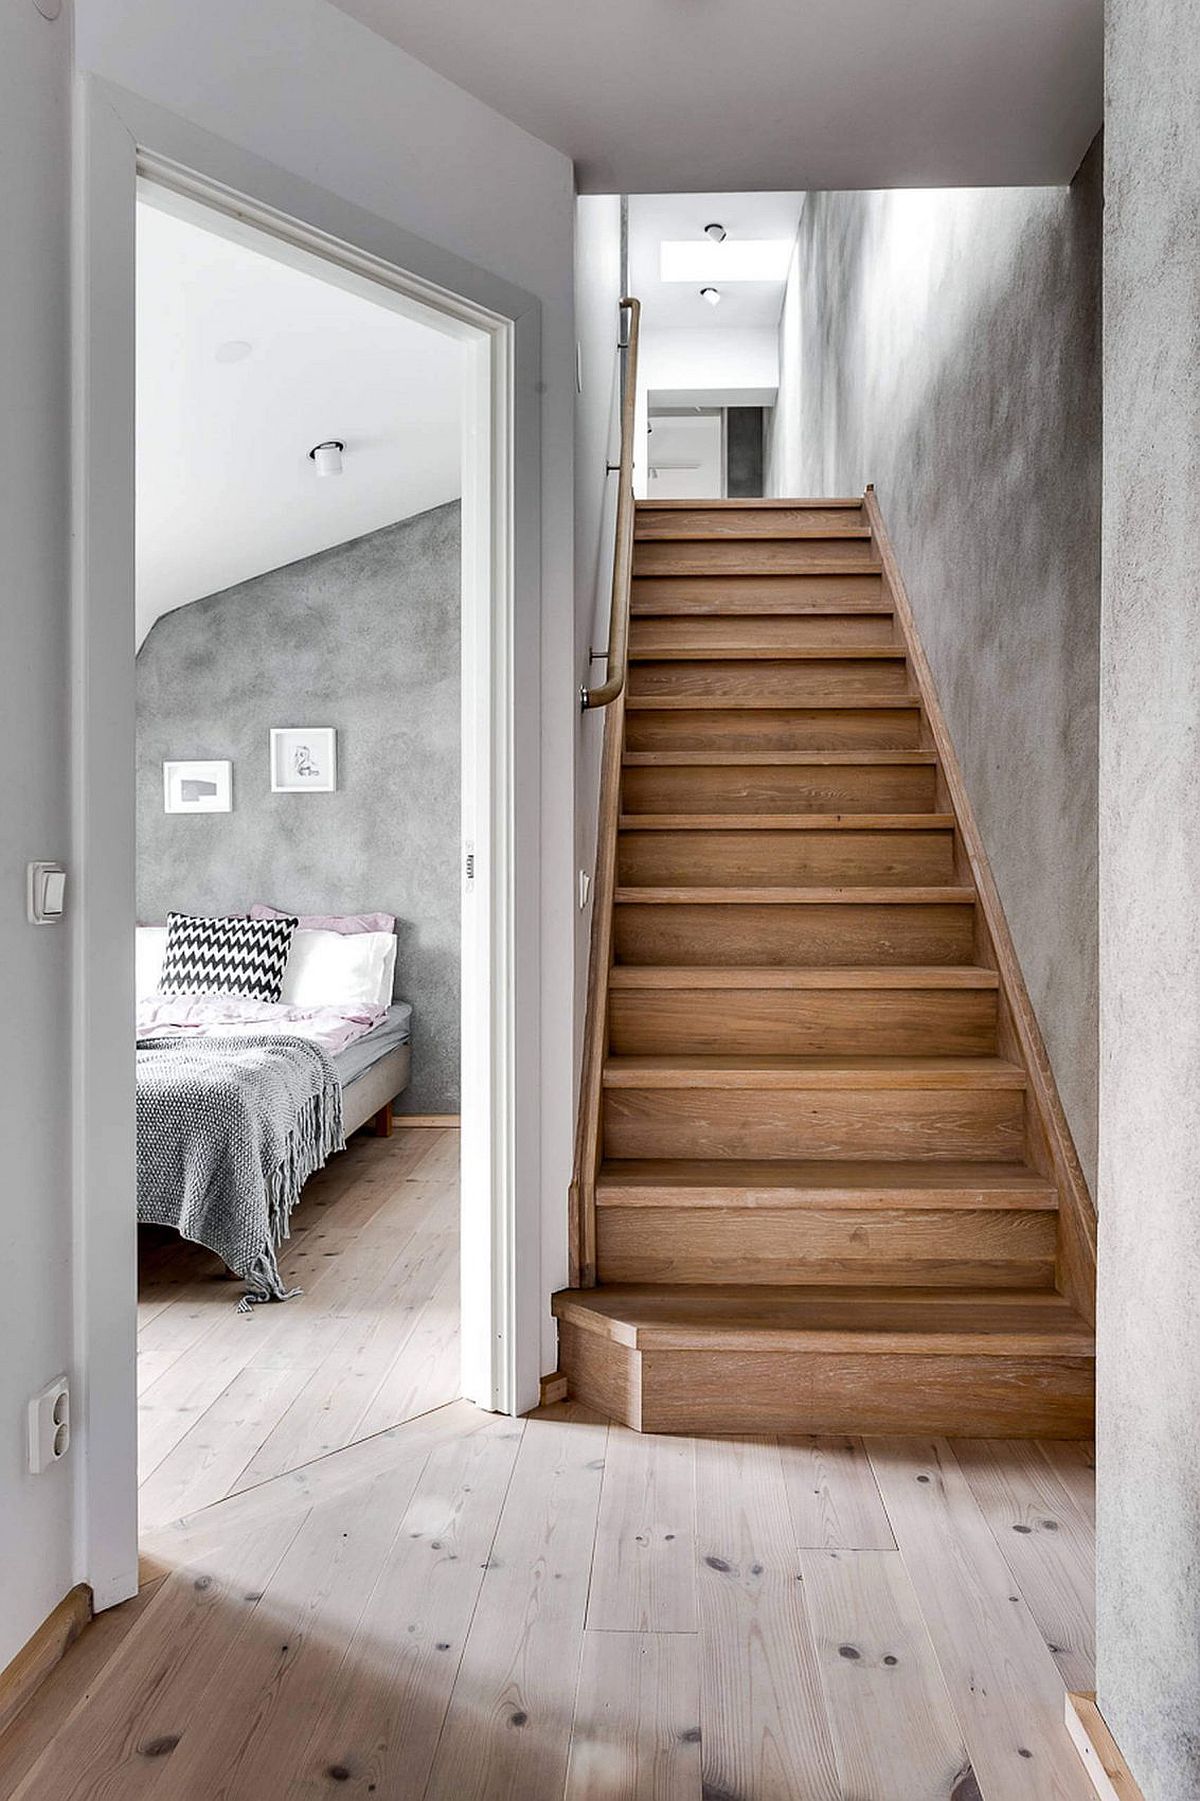 Wooden-staircase-leading-to-the-ebdroom-of-the-Scandinavian-apartment